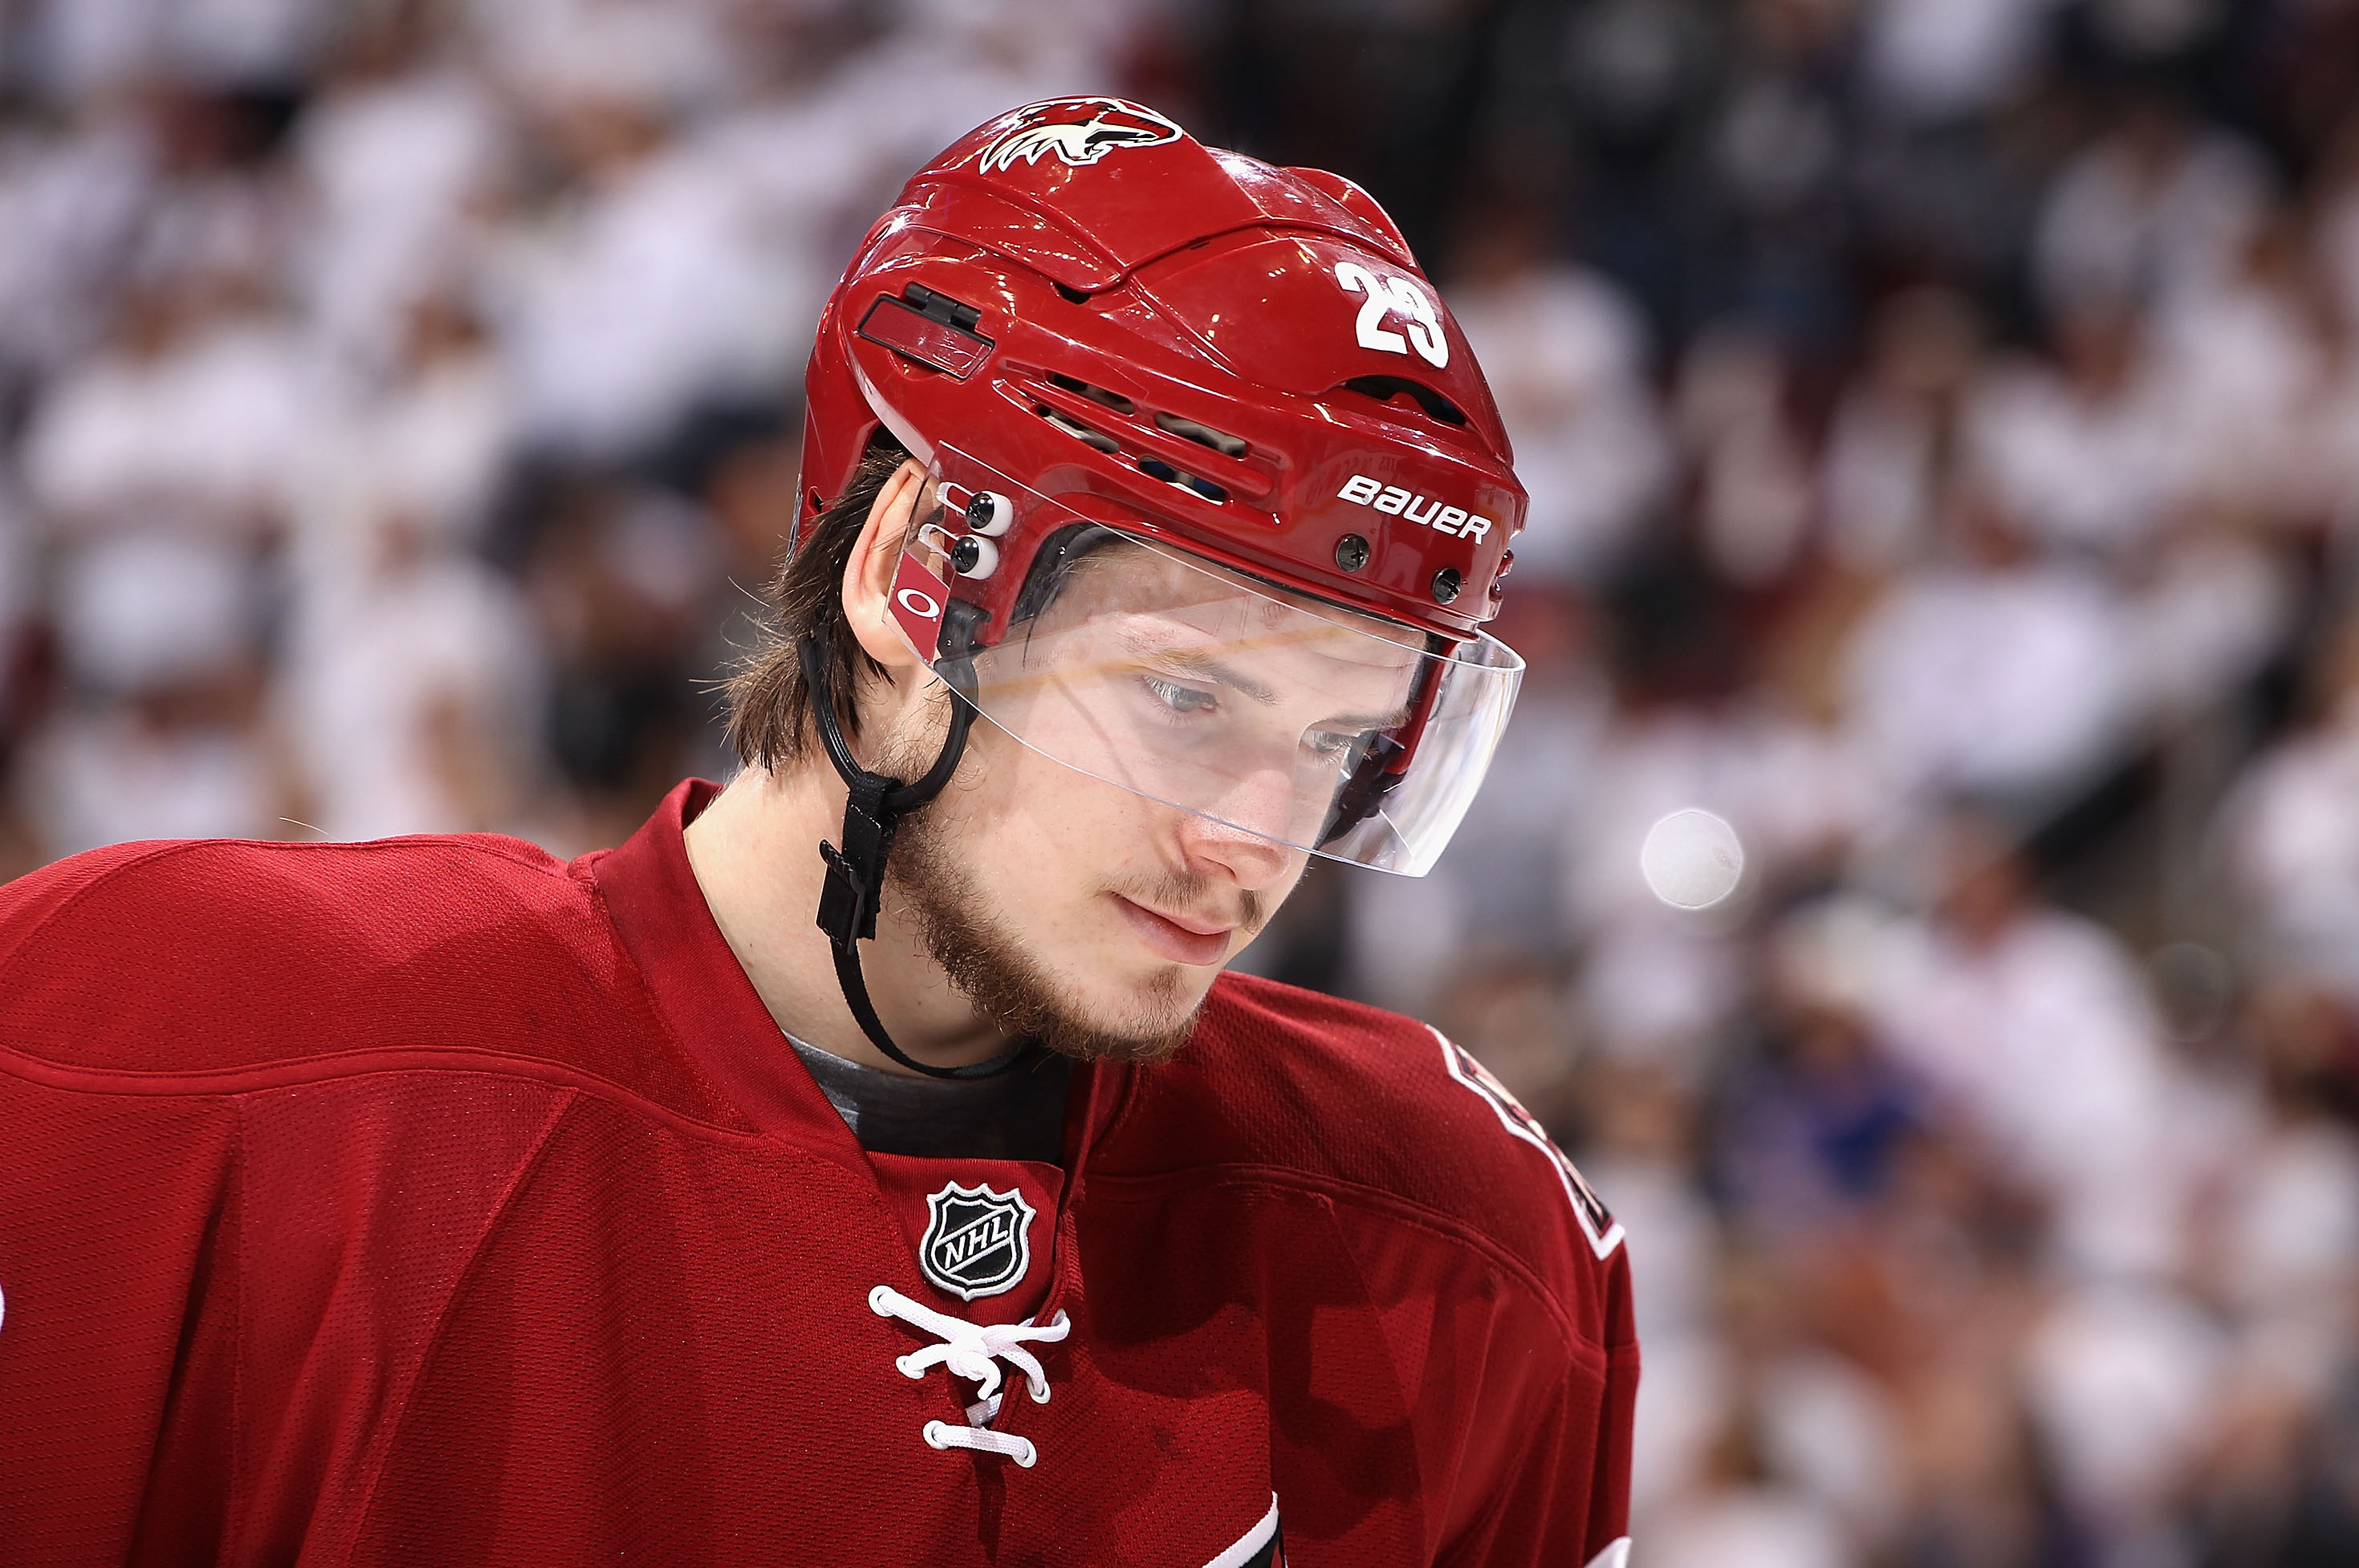 Hockey healing Oliver Ekman-Larsson as he embraces new era for Coyotes